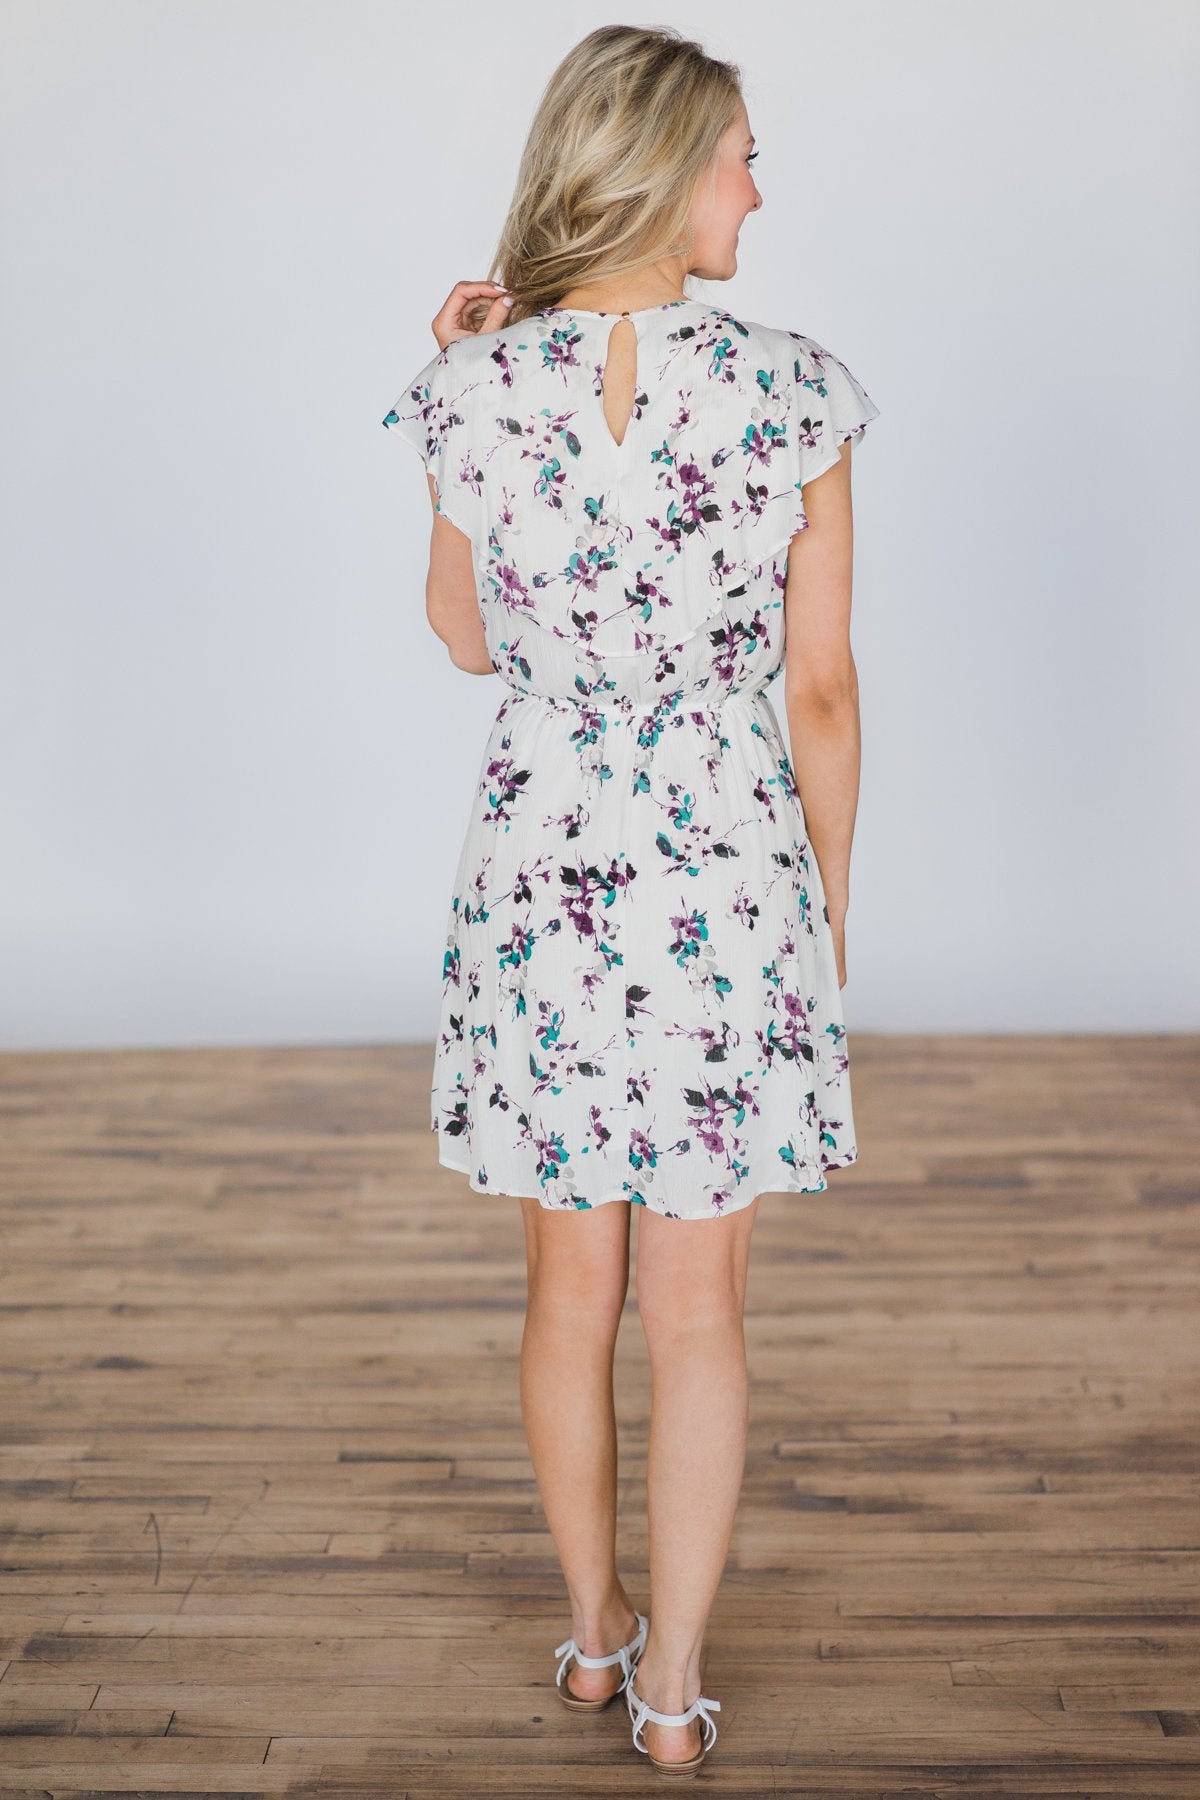 Ruffles and You Floral Dress- Ivory